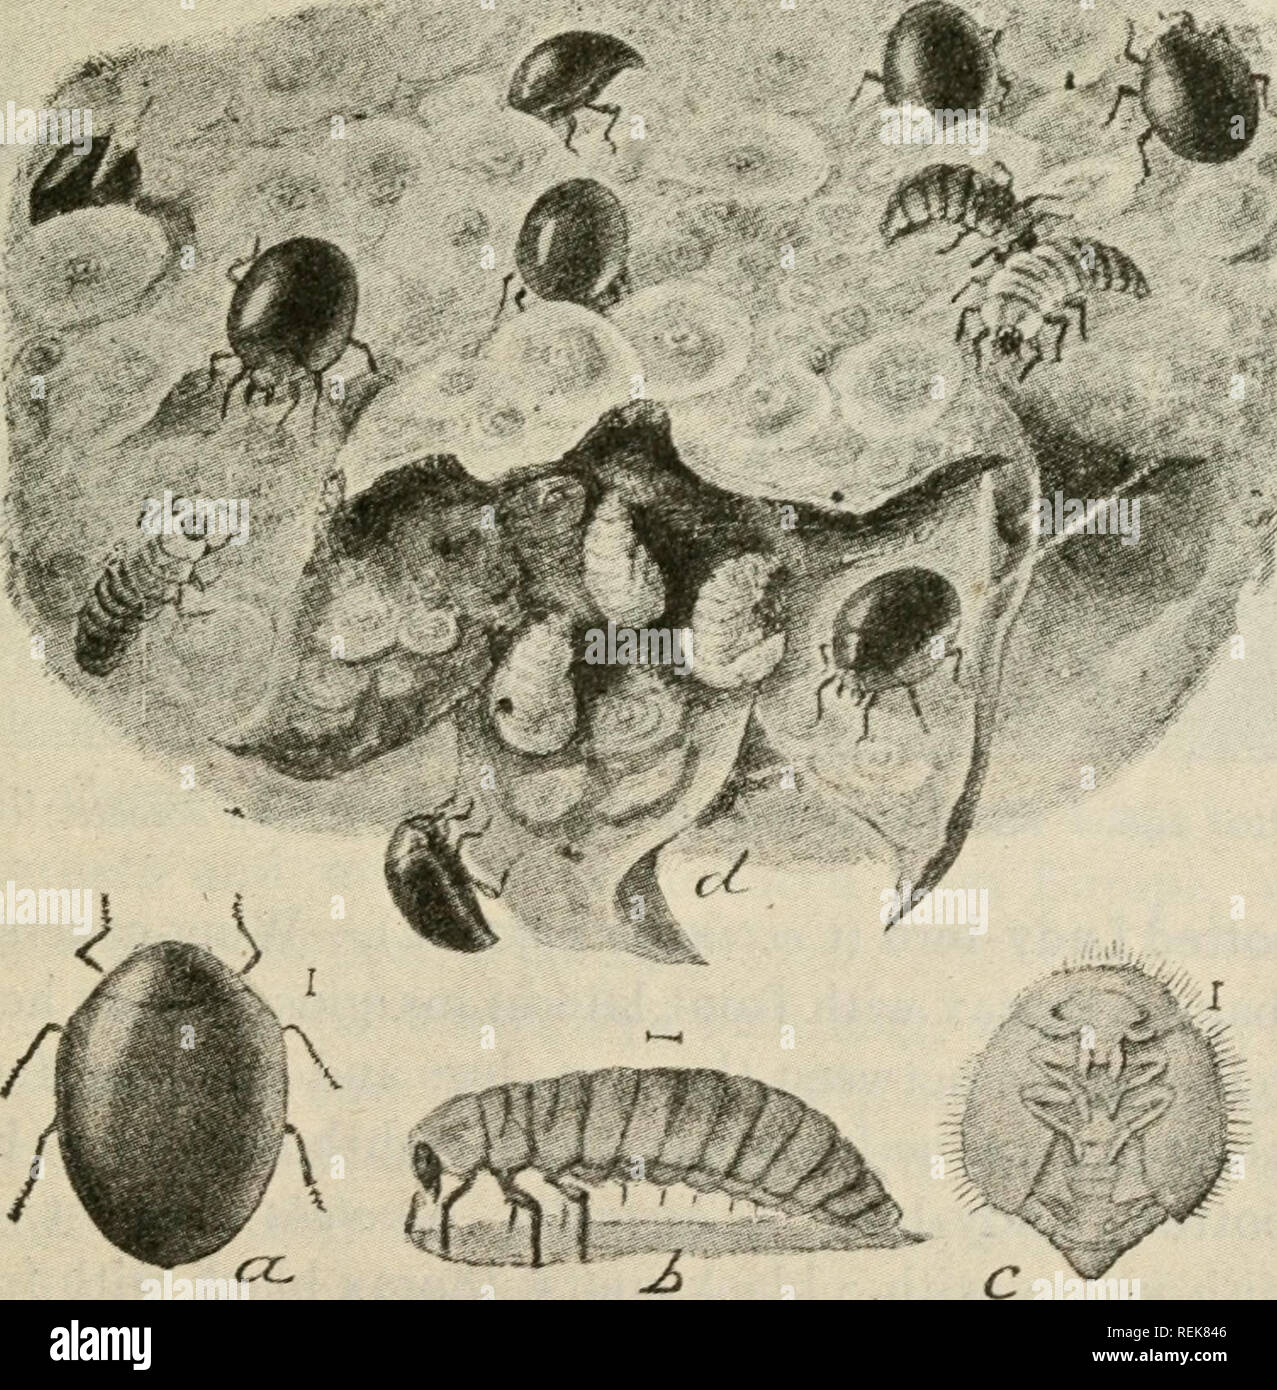 . Class book of economic entomology. Insects, Injurious and beneficial. [from old catalog]; Insects; Insects. Fig. 188.—Lady-bird beetles: a, a 2-spotted lady-beetle (Adalia bipunctata); b, the convergent lady-beetle {Hippodamia convey gens); c, the g-spotted lady- beetle (Coccinella g-notata); d, twice-stabbed lady-bird (Chilocorus bivulnertis); e, the 5-spotted lady-beetle (C. $-notala). {After Briiton.). Pig. iSQ.—Pentilia misella LeC: a, beetle; b, larva; c, pupa; d, blossom end of scale infested pear, showing beetles and their larvae feeding upon the scales, all greatly enlarged. {After H Stock Photo